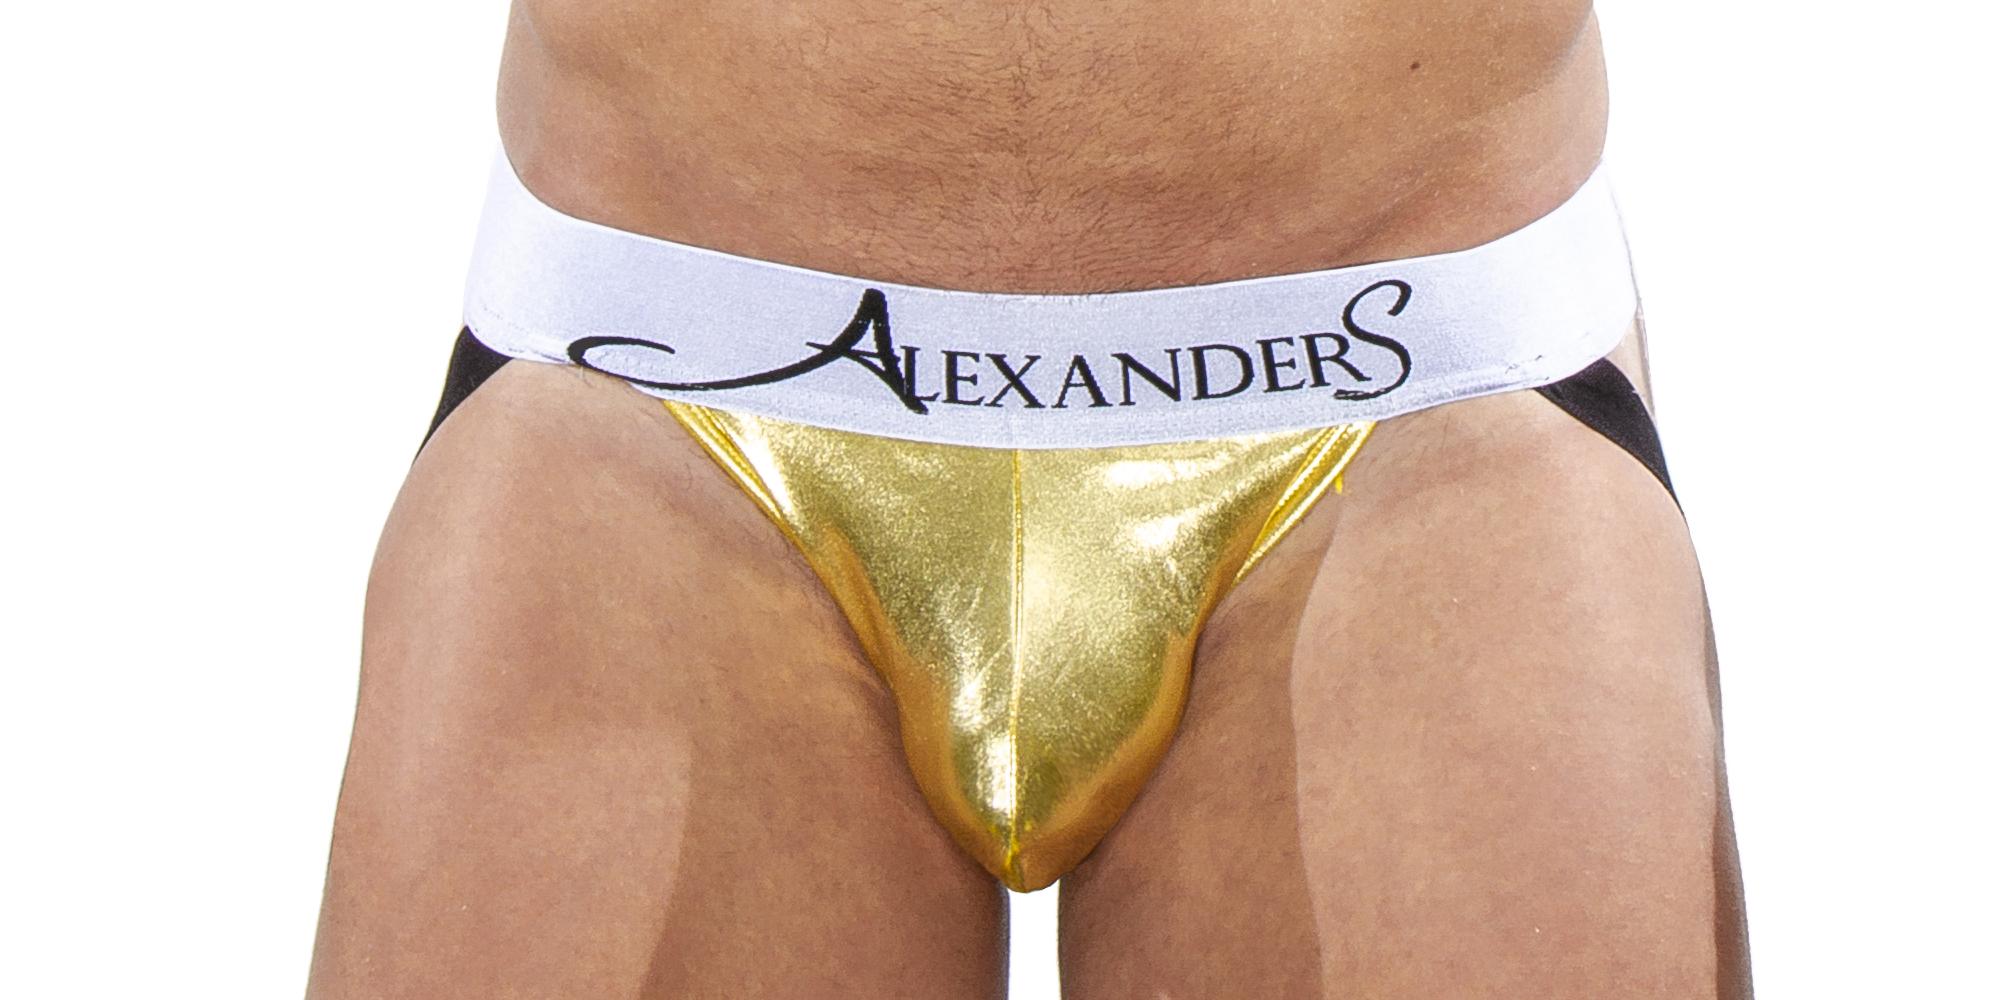 AlexanderS Jockstrap collection is here!  This bright jock is fun, sporty and supportive in all the right places. Traditionally, athletic supporters furnish.